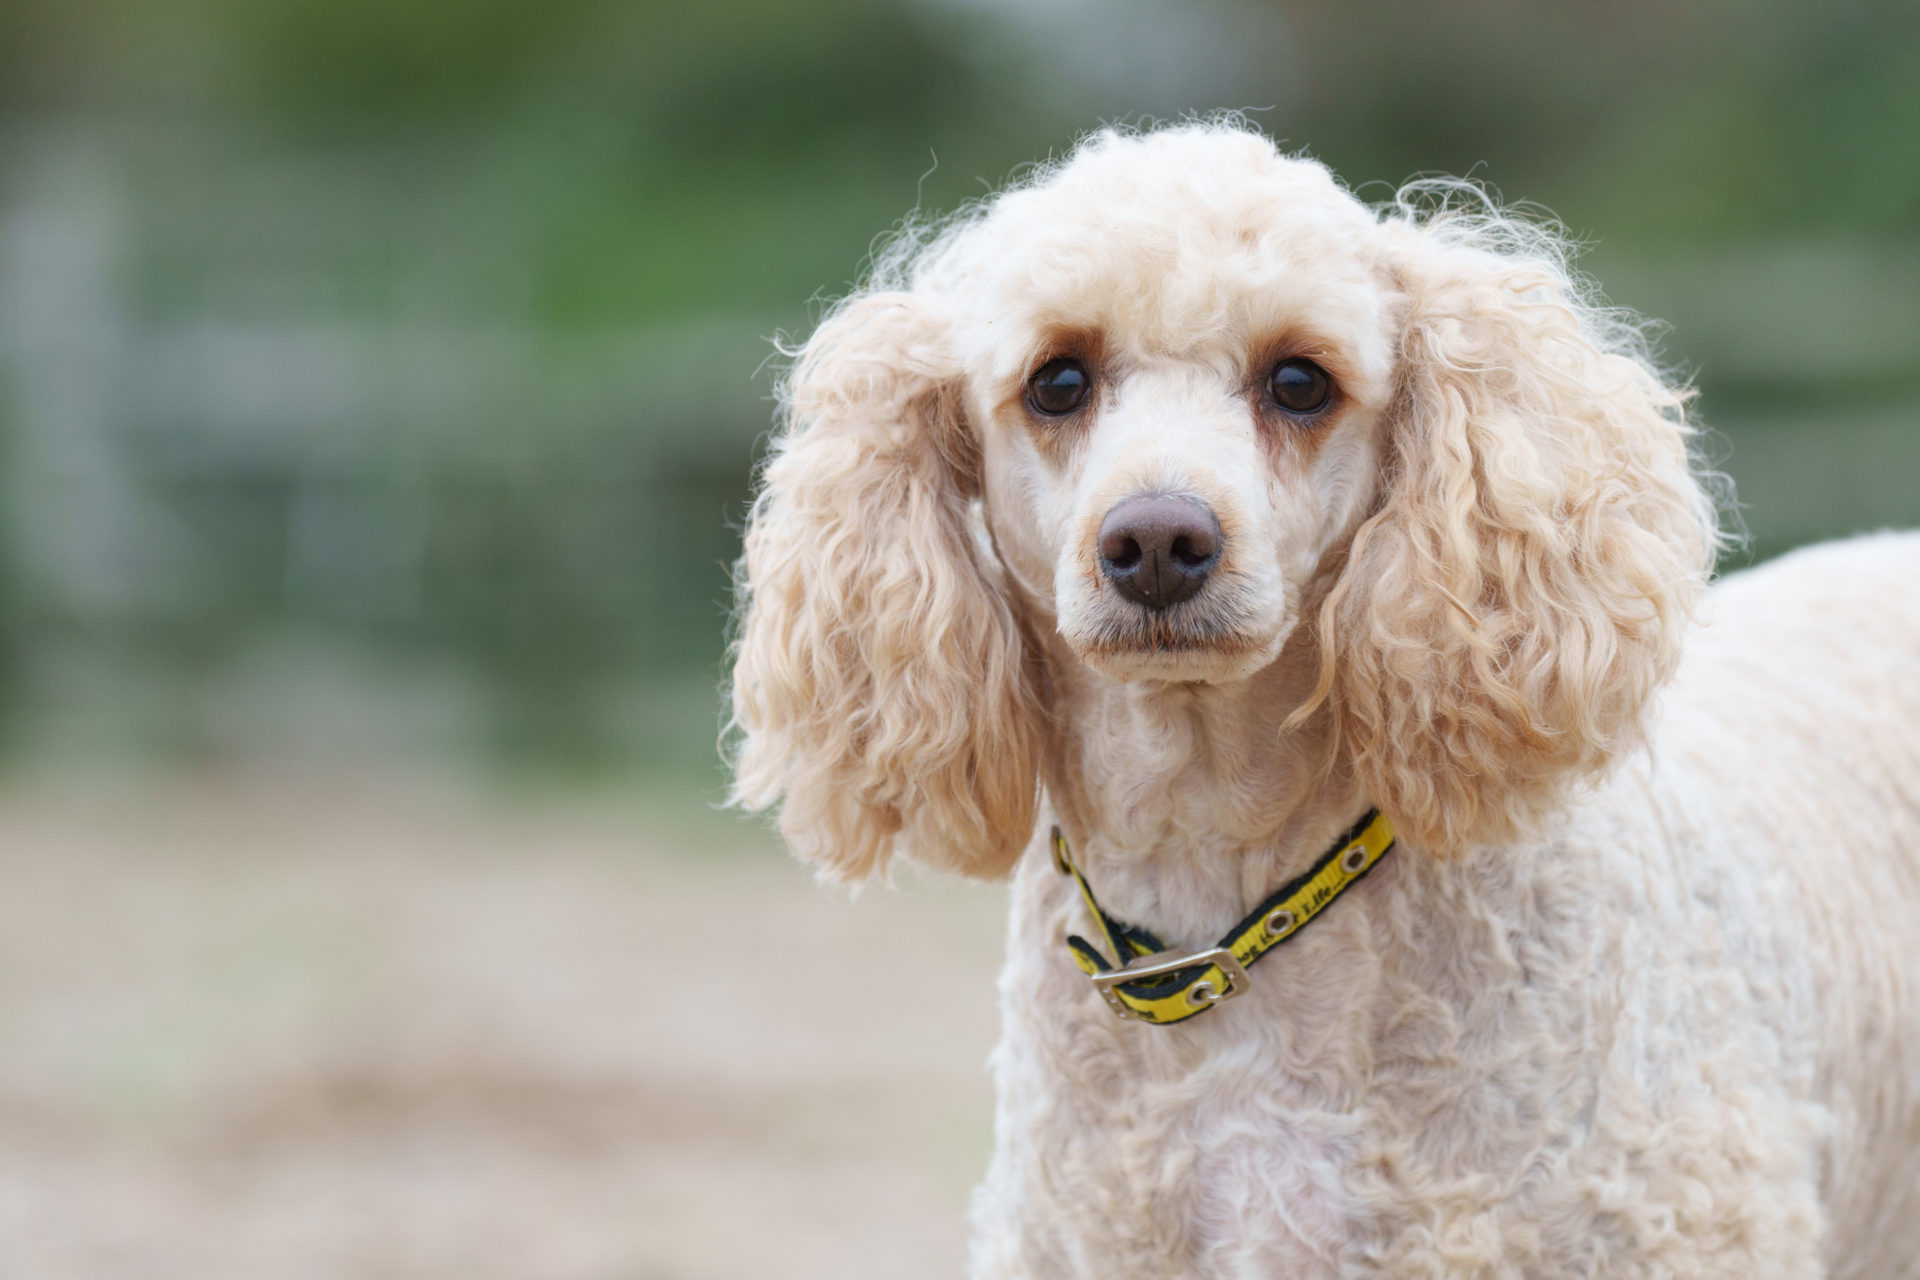 Mollie, a six-year-old Poodle, who was cared for by Dogs Trust Ireland after she was rescued form a puppy farm.